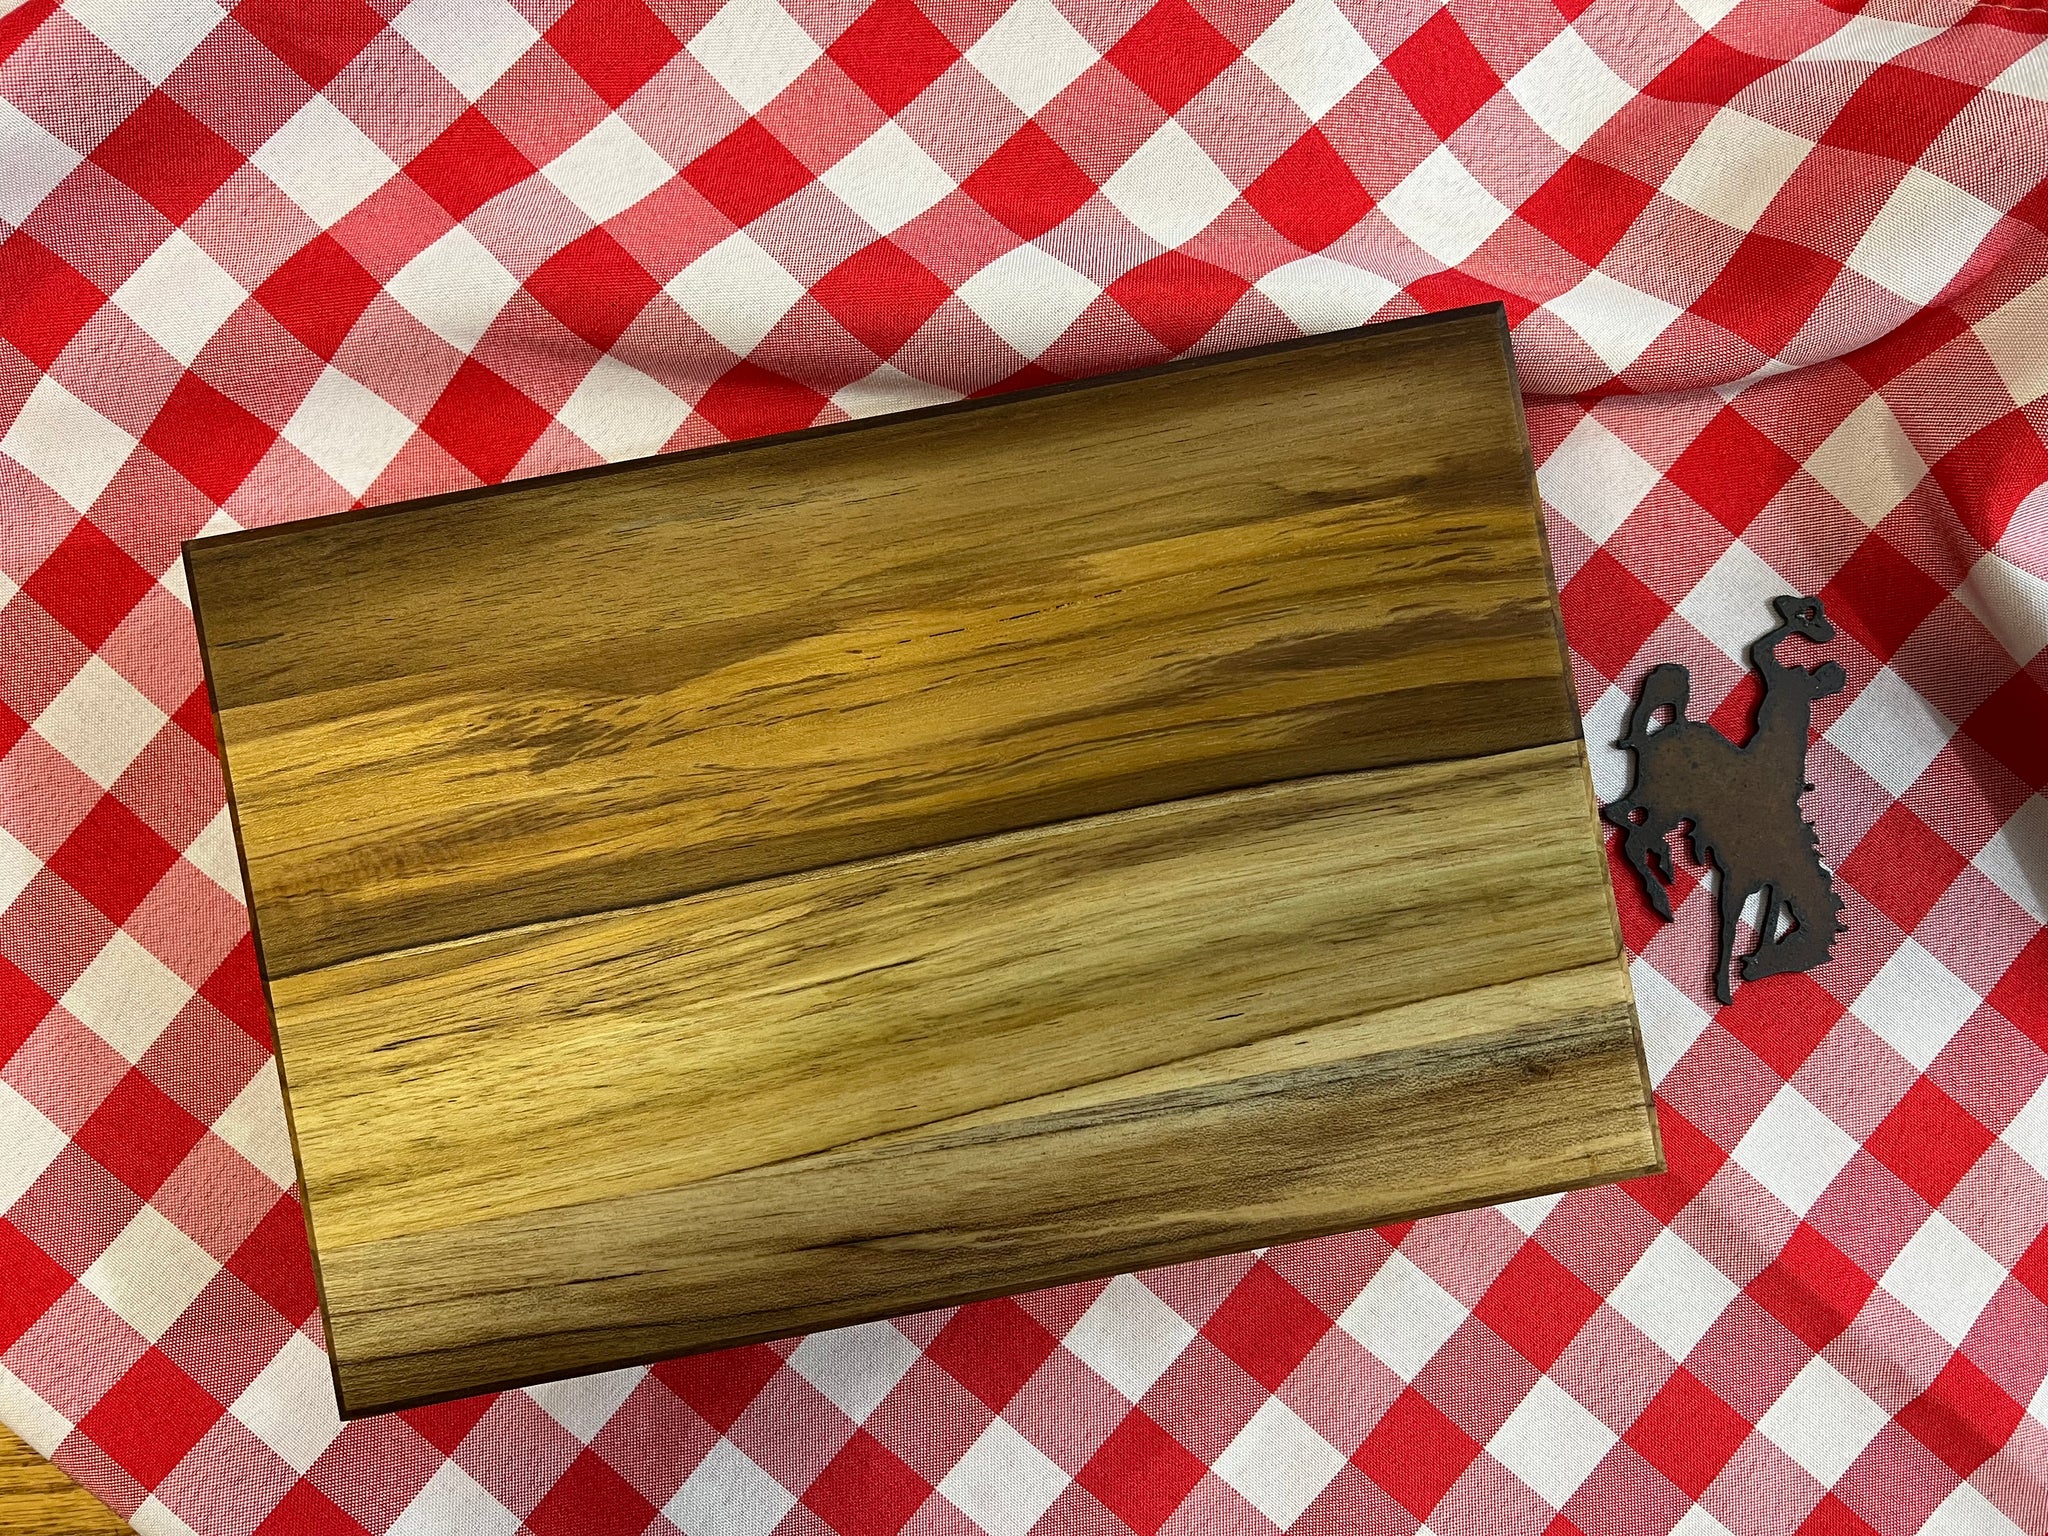 Womack Woodworking: 7.75" X 12" teak cutting board with juice groove